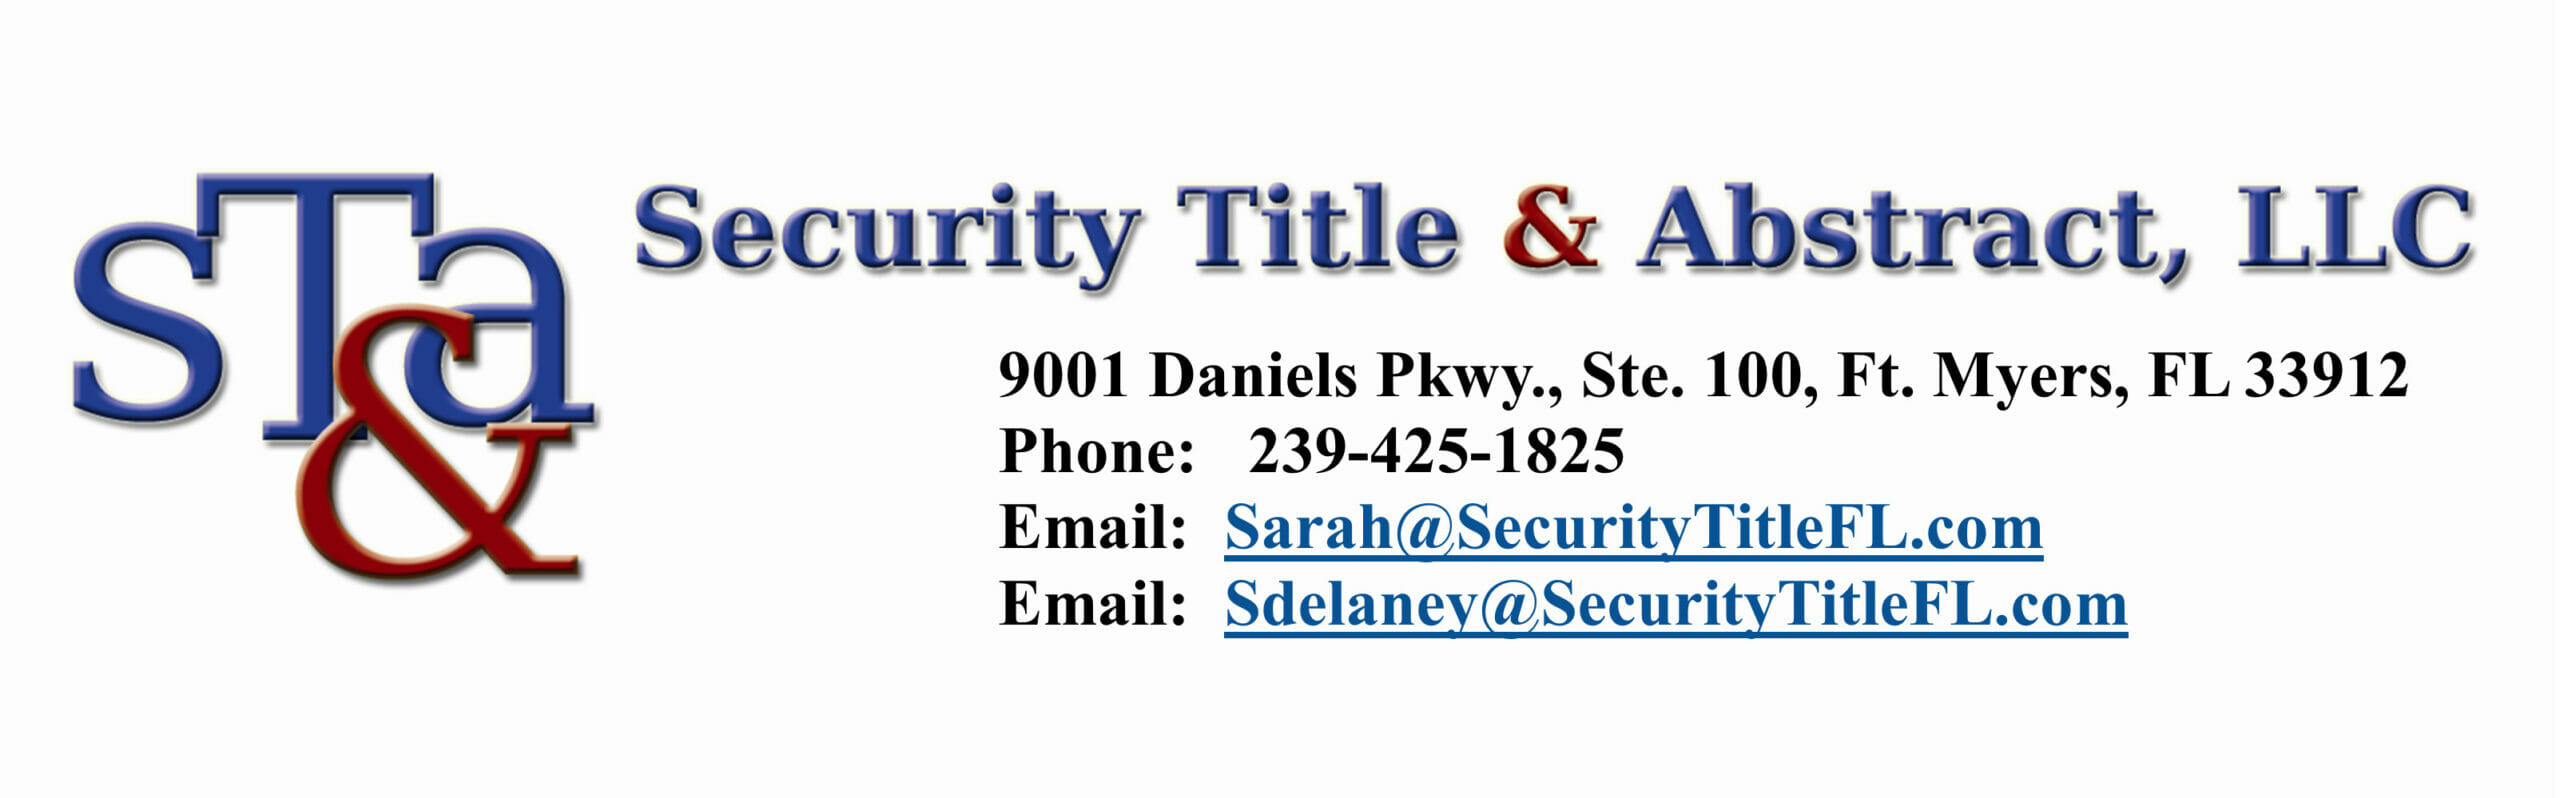 Security Title w info